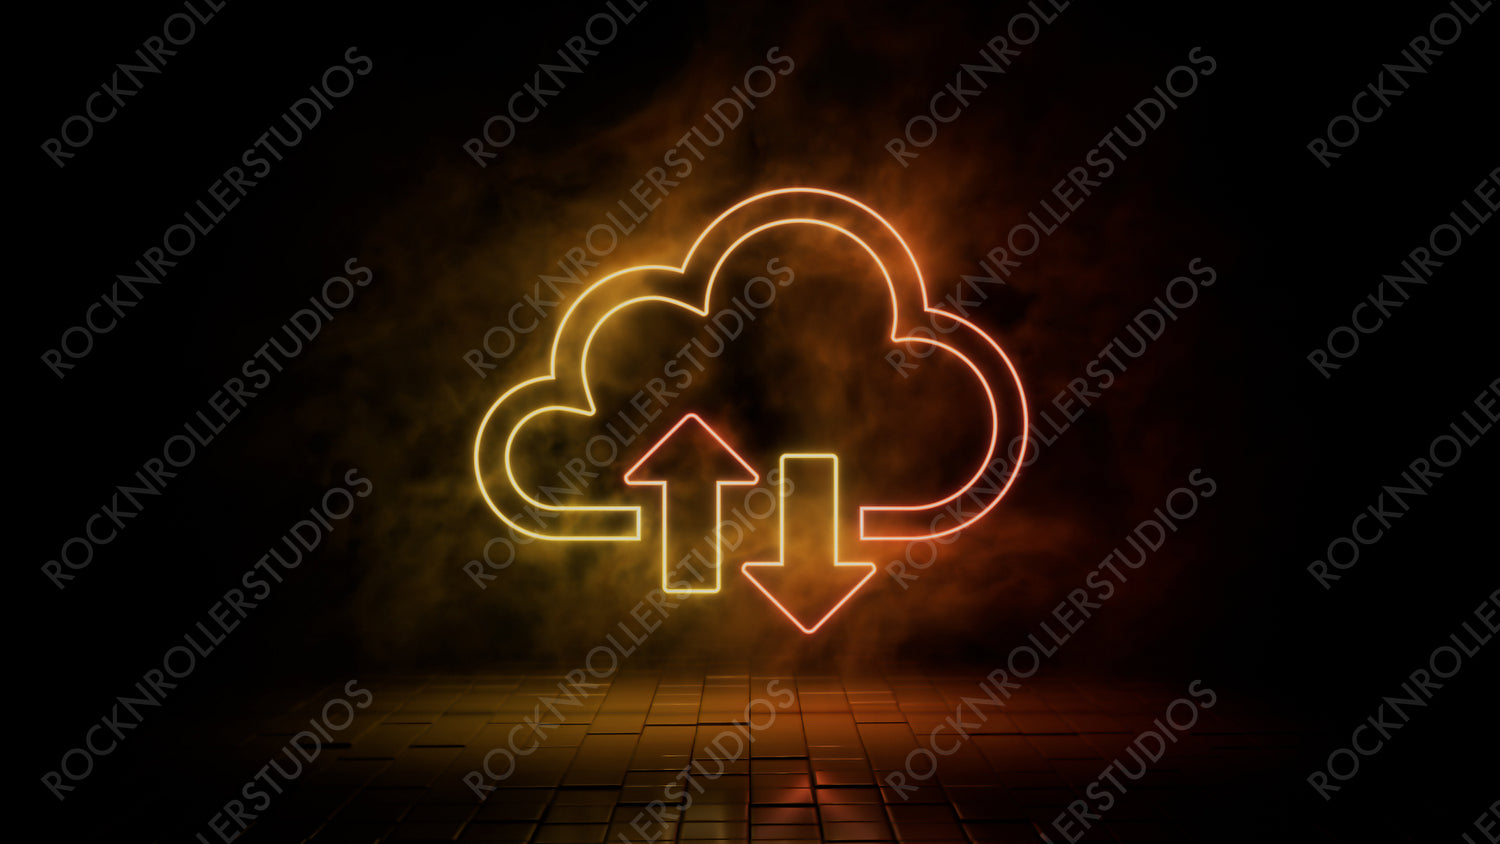 Orange and yellow neon light cloud icon. Vibrant colored technology symbol, isolated on a black background. 3D Render